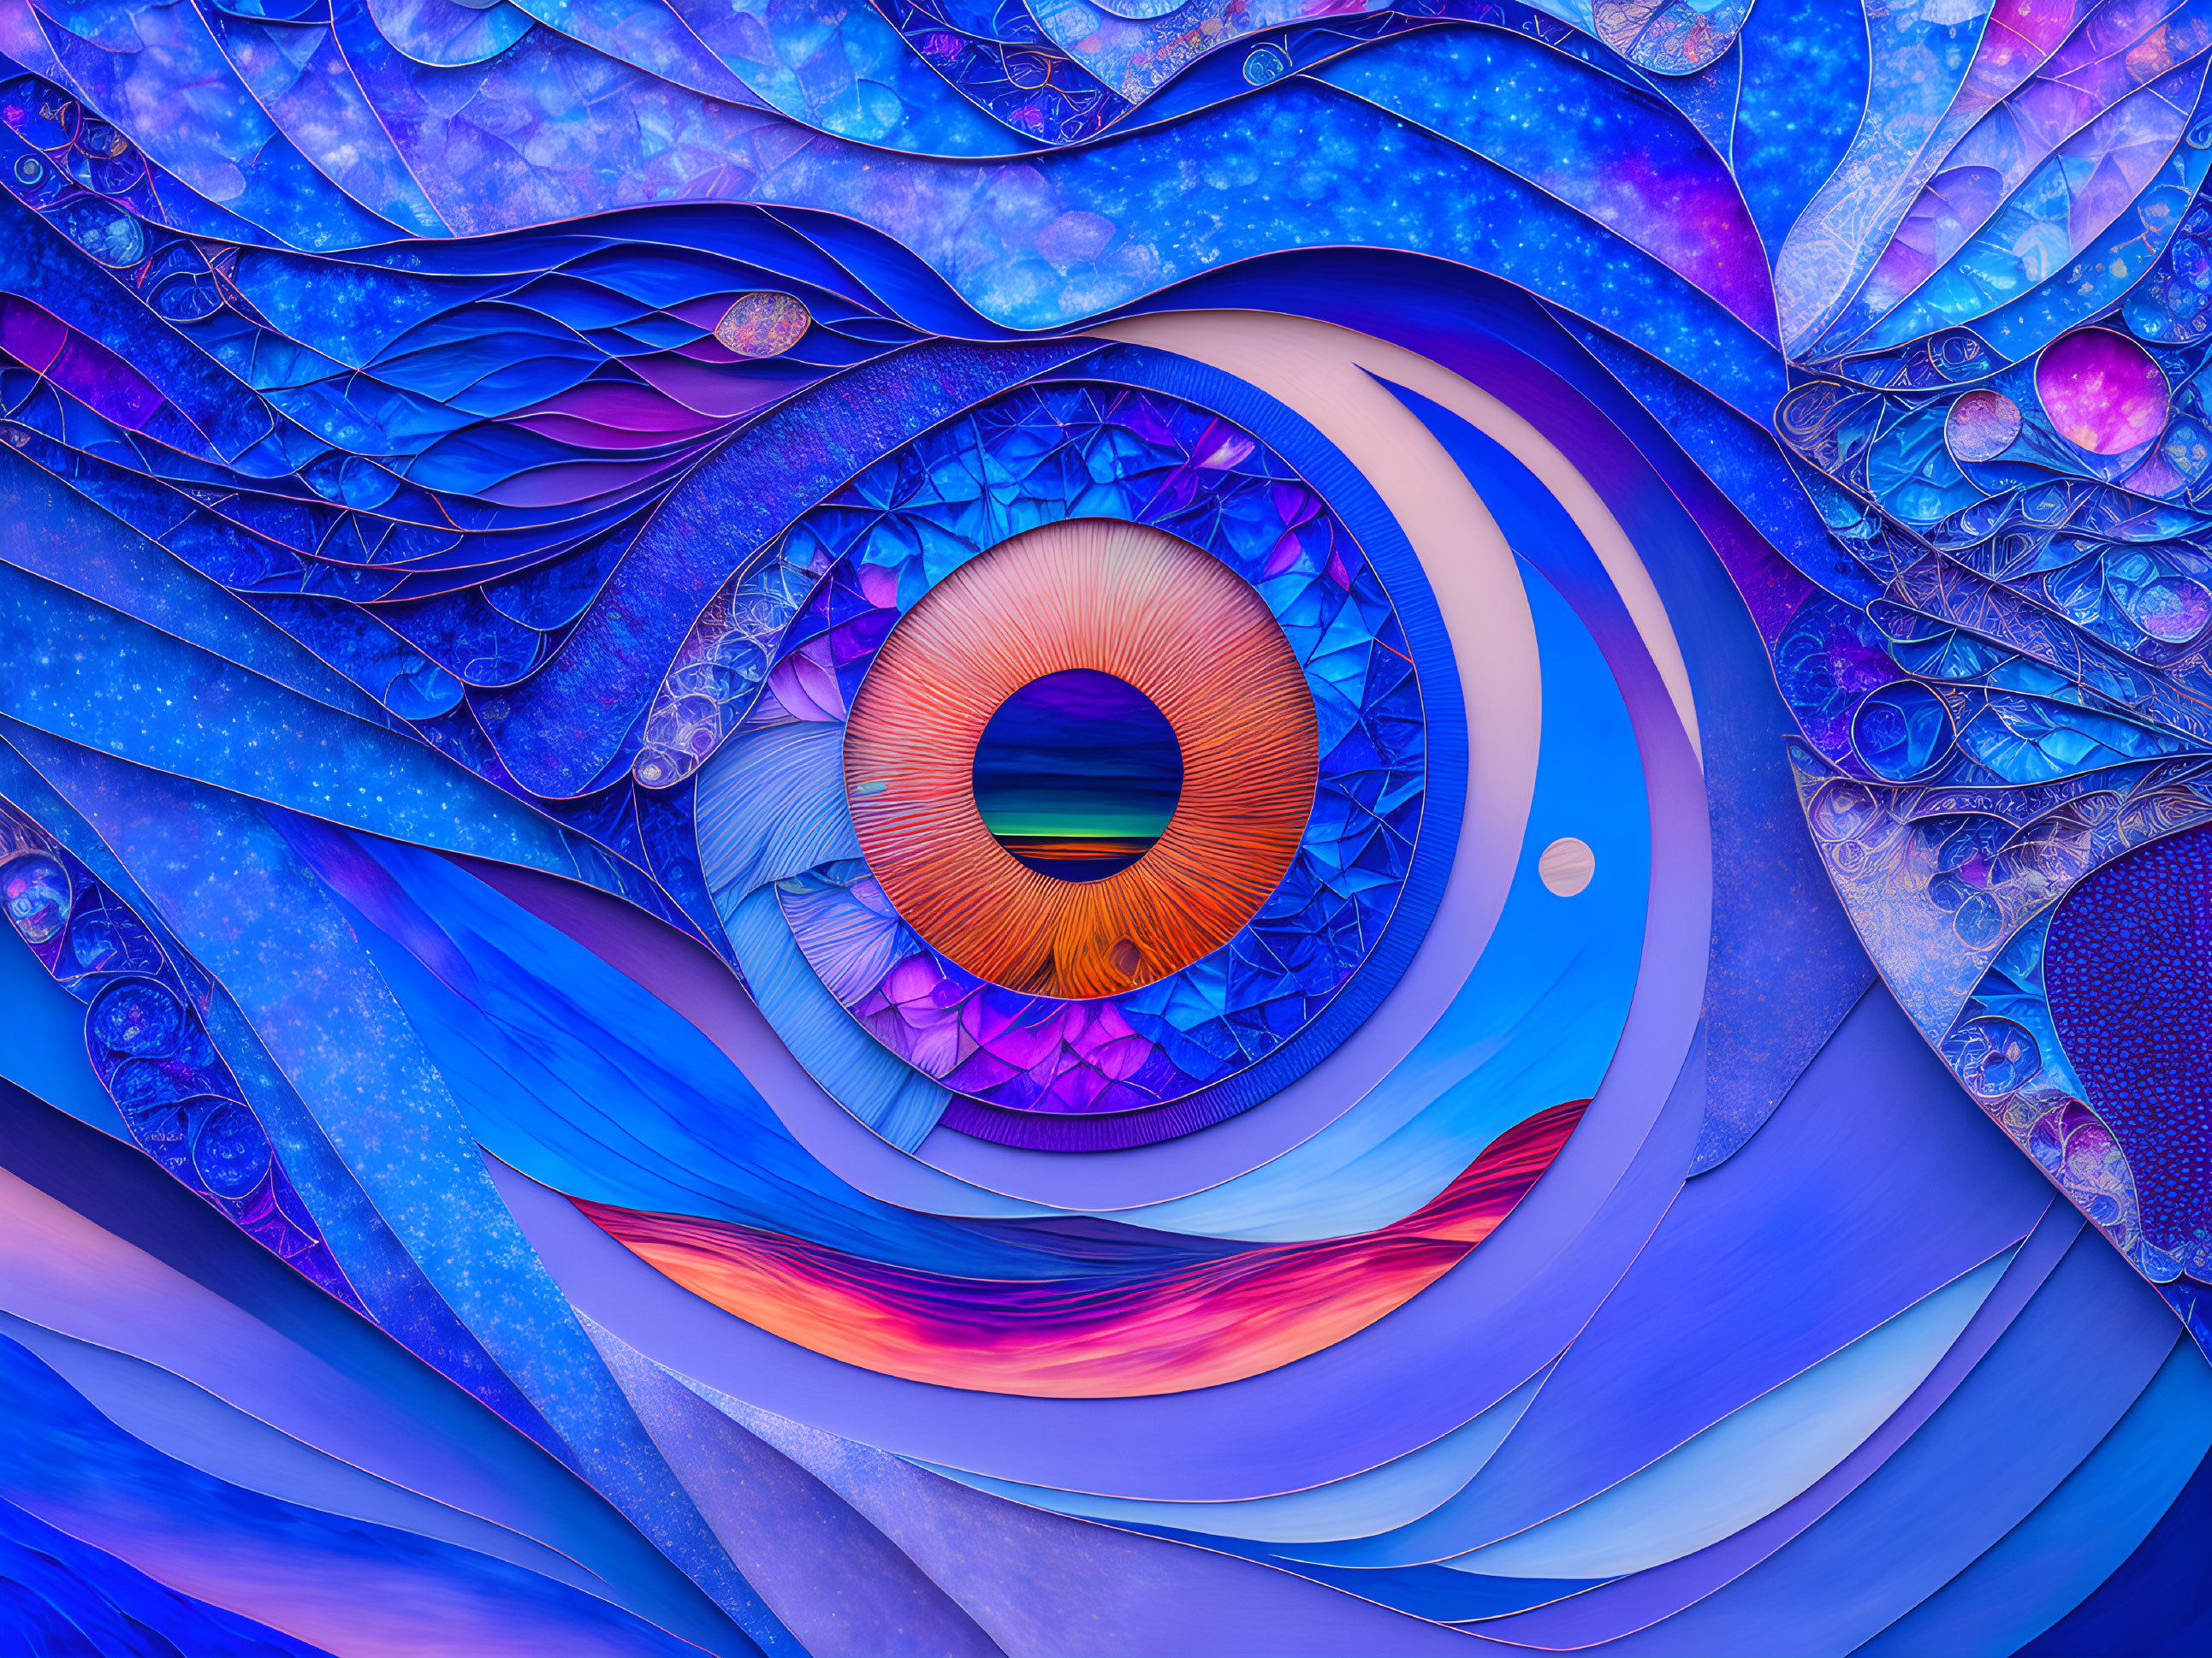 Ethereal Eye: Abstract Colorful Vision